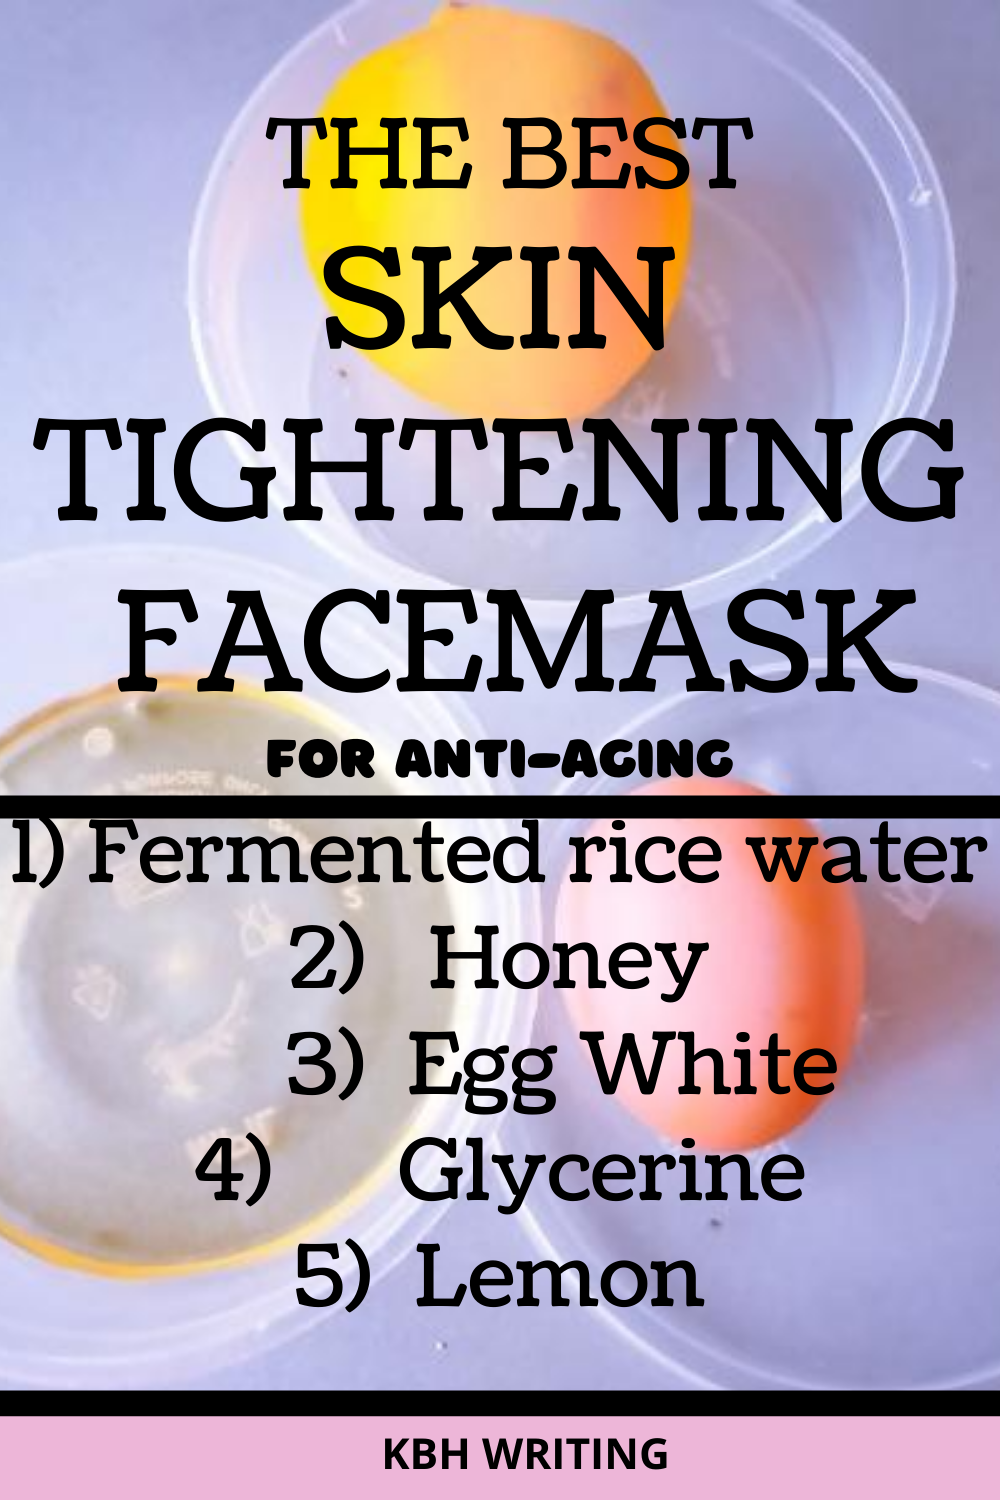 How to Use Rice Water For Skin Tightening and Whitening